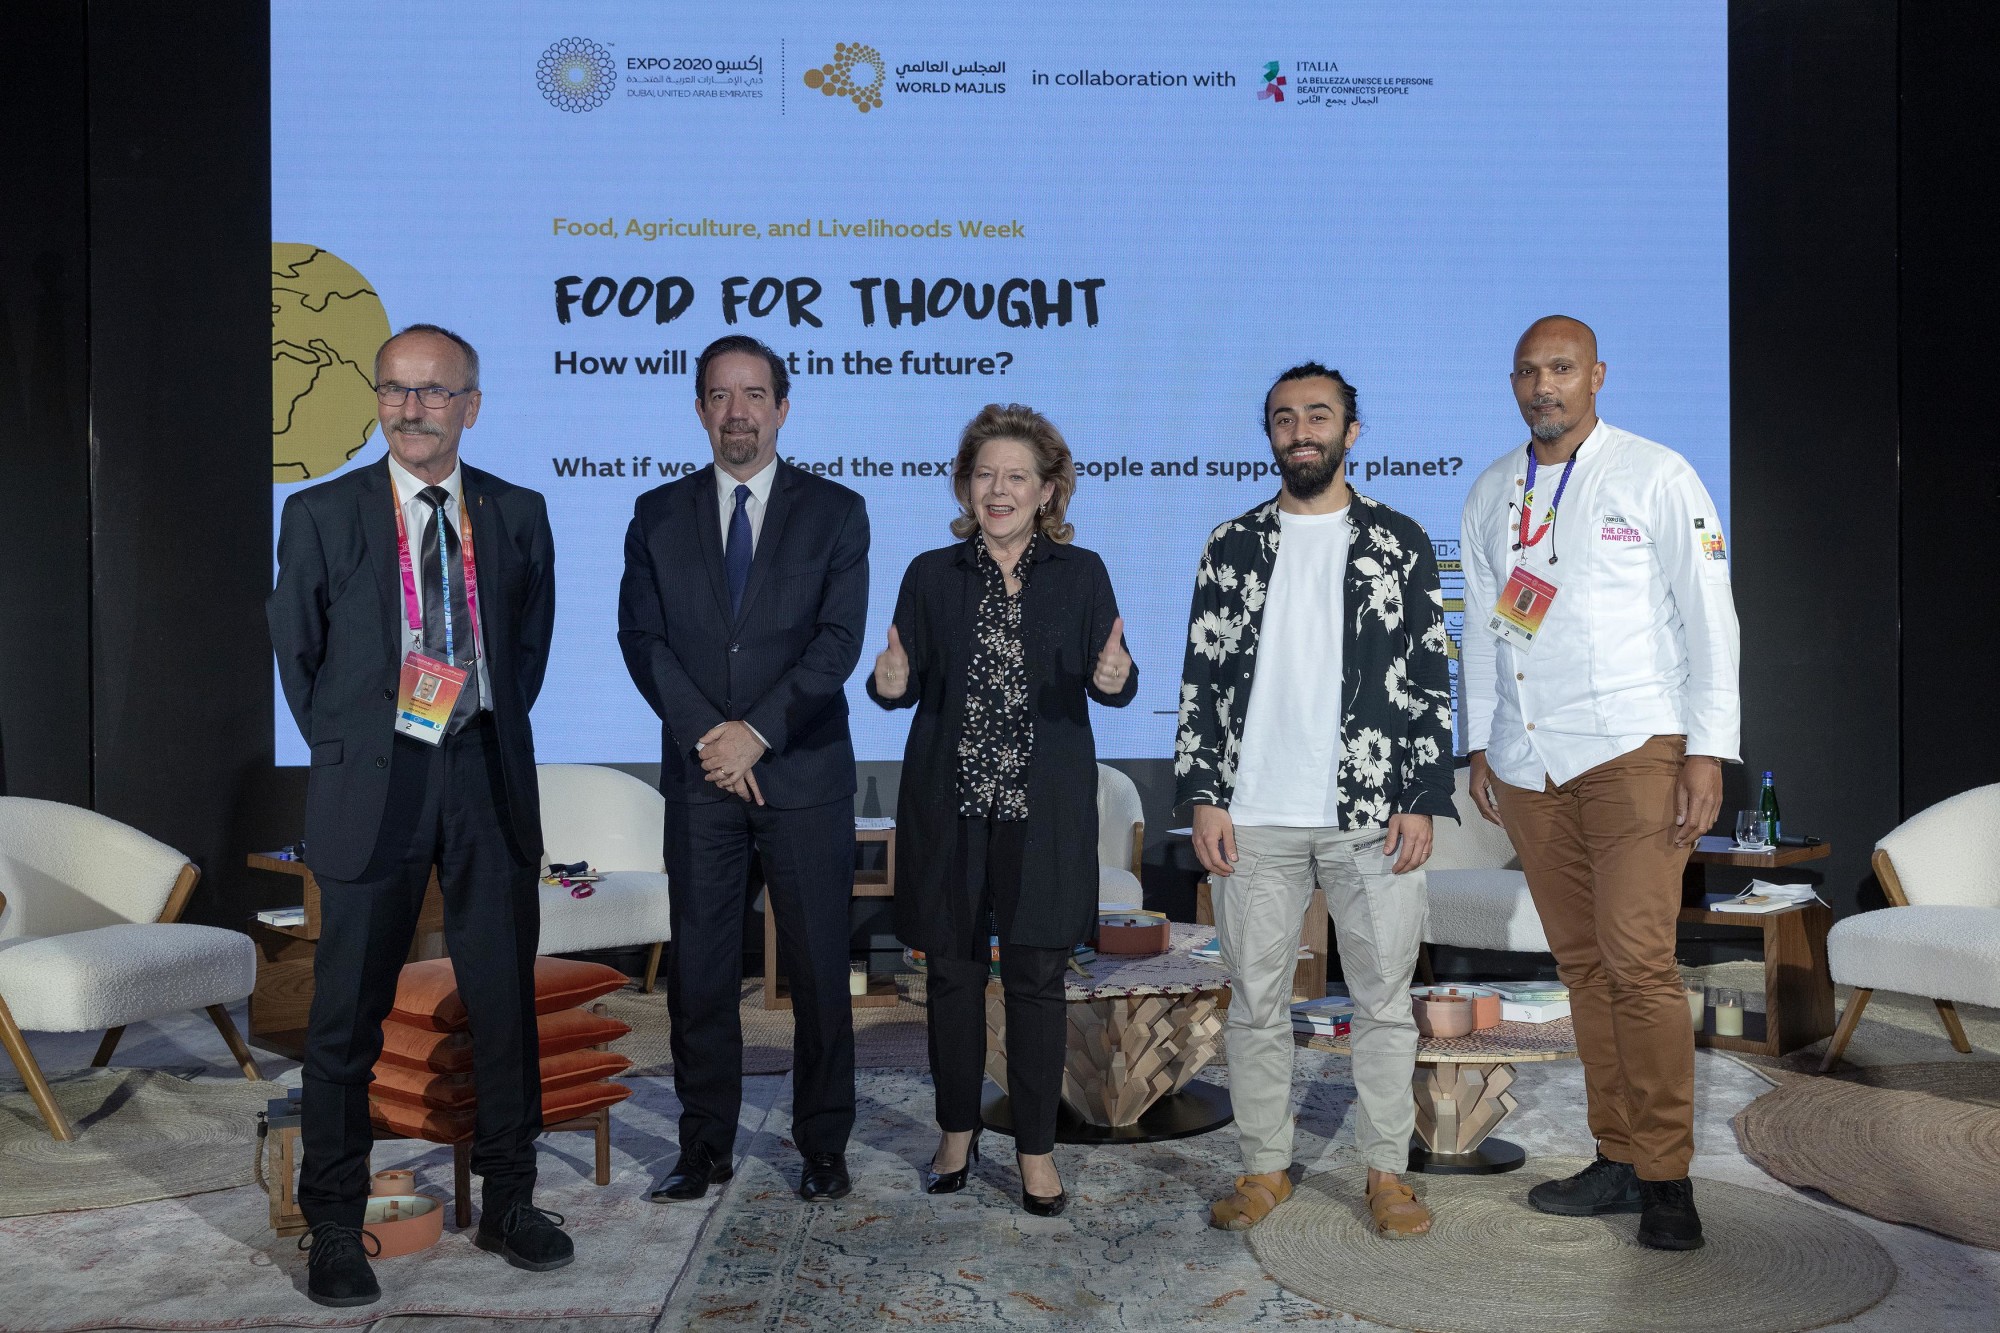 A group photo of Eithne Treanor (C), Moderator, Managing Director of E Treanor Media, Chef Coco Reinarhz (R1), International Chef and Restauranteur, Amin Emadi (R2), Food and Agriculture Organisation, Switzerland, Dr Celso Moretti (L2), CEO,